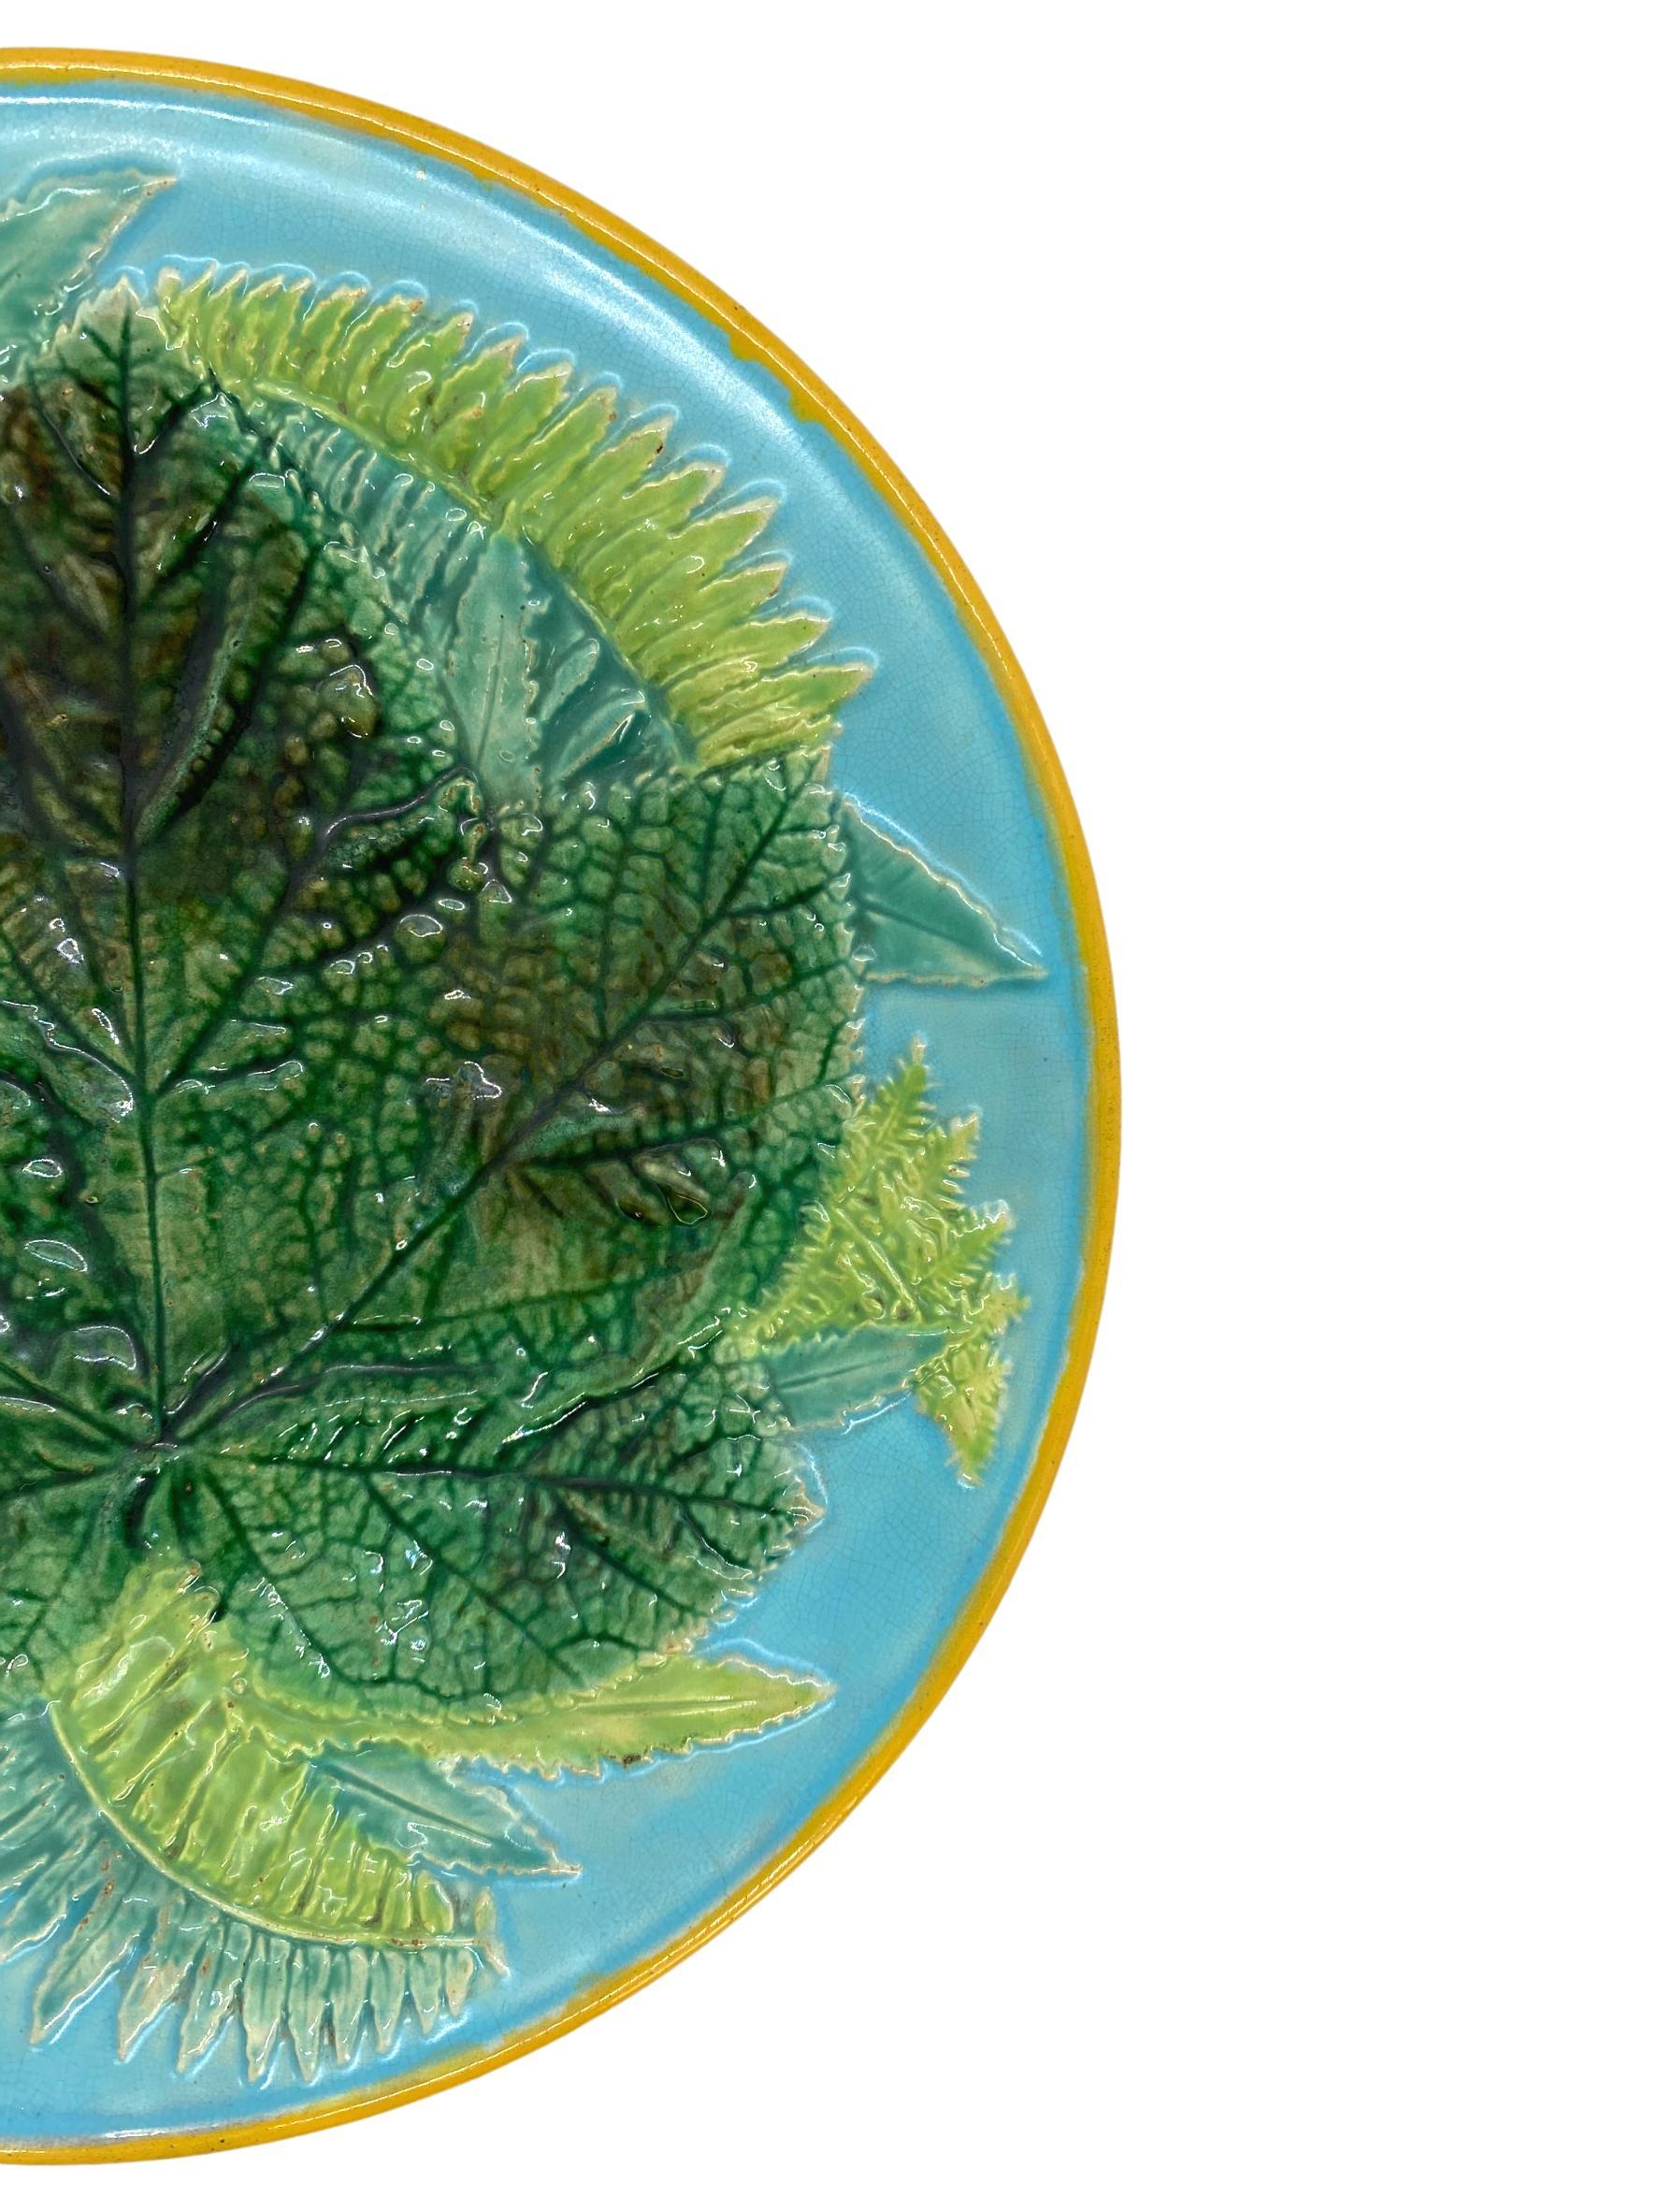 Victorian George Jones Majolica Maple Leaf and Ferns Plate on Turquoise, English, ca. 1873